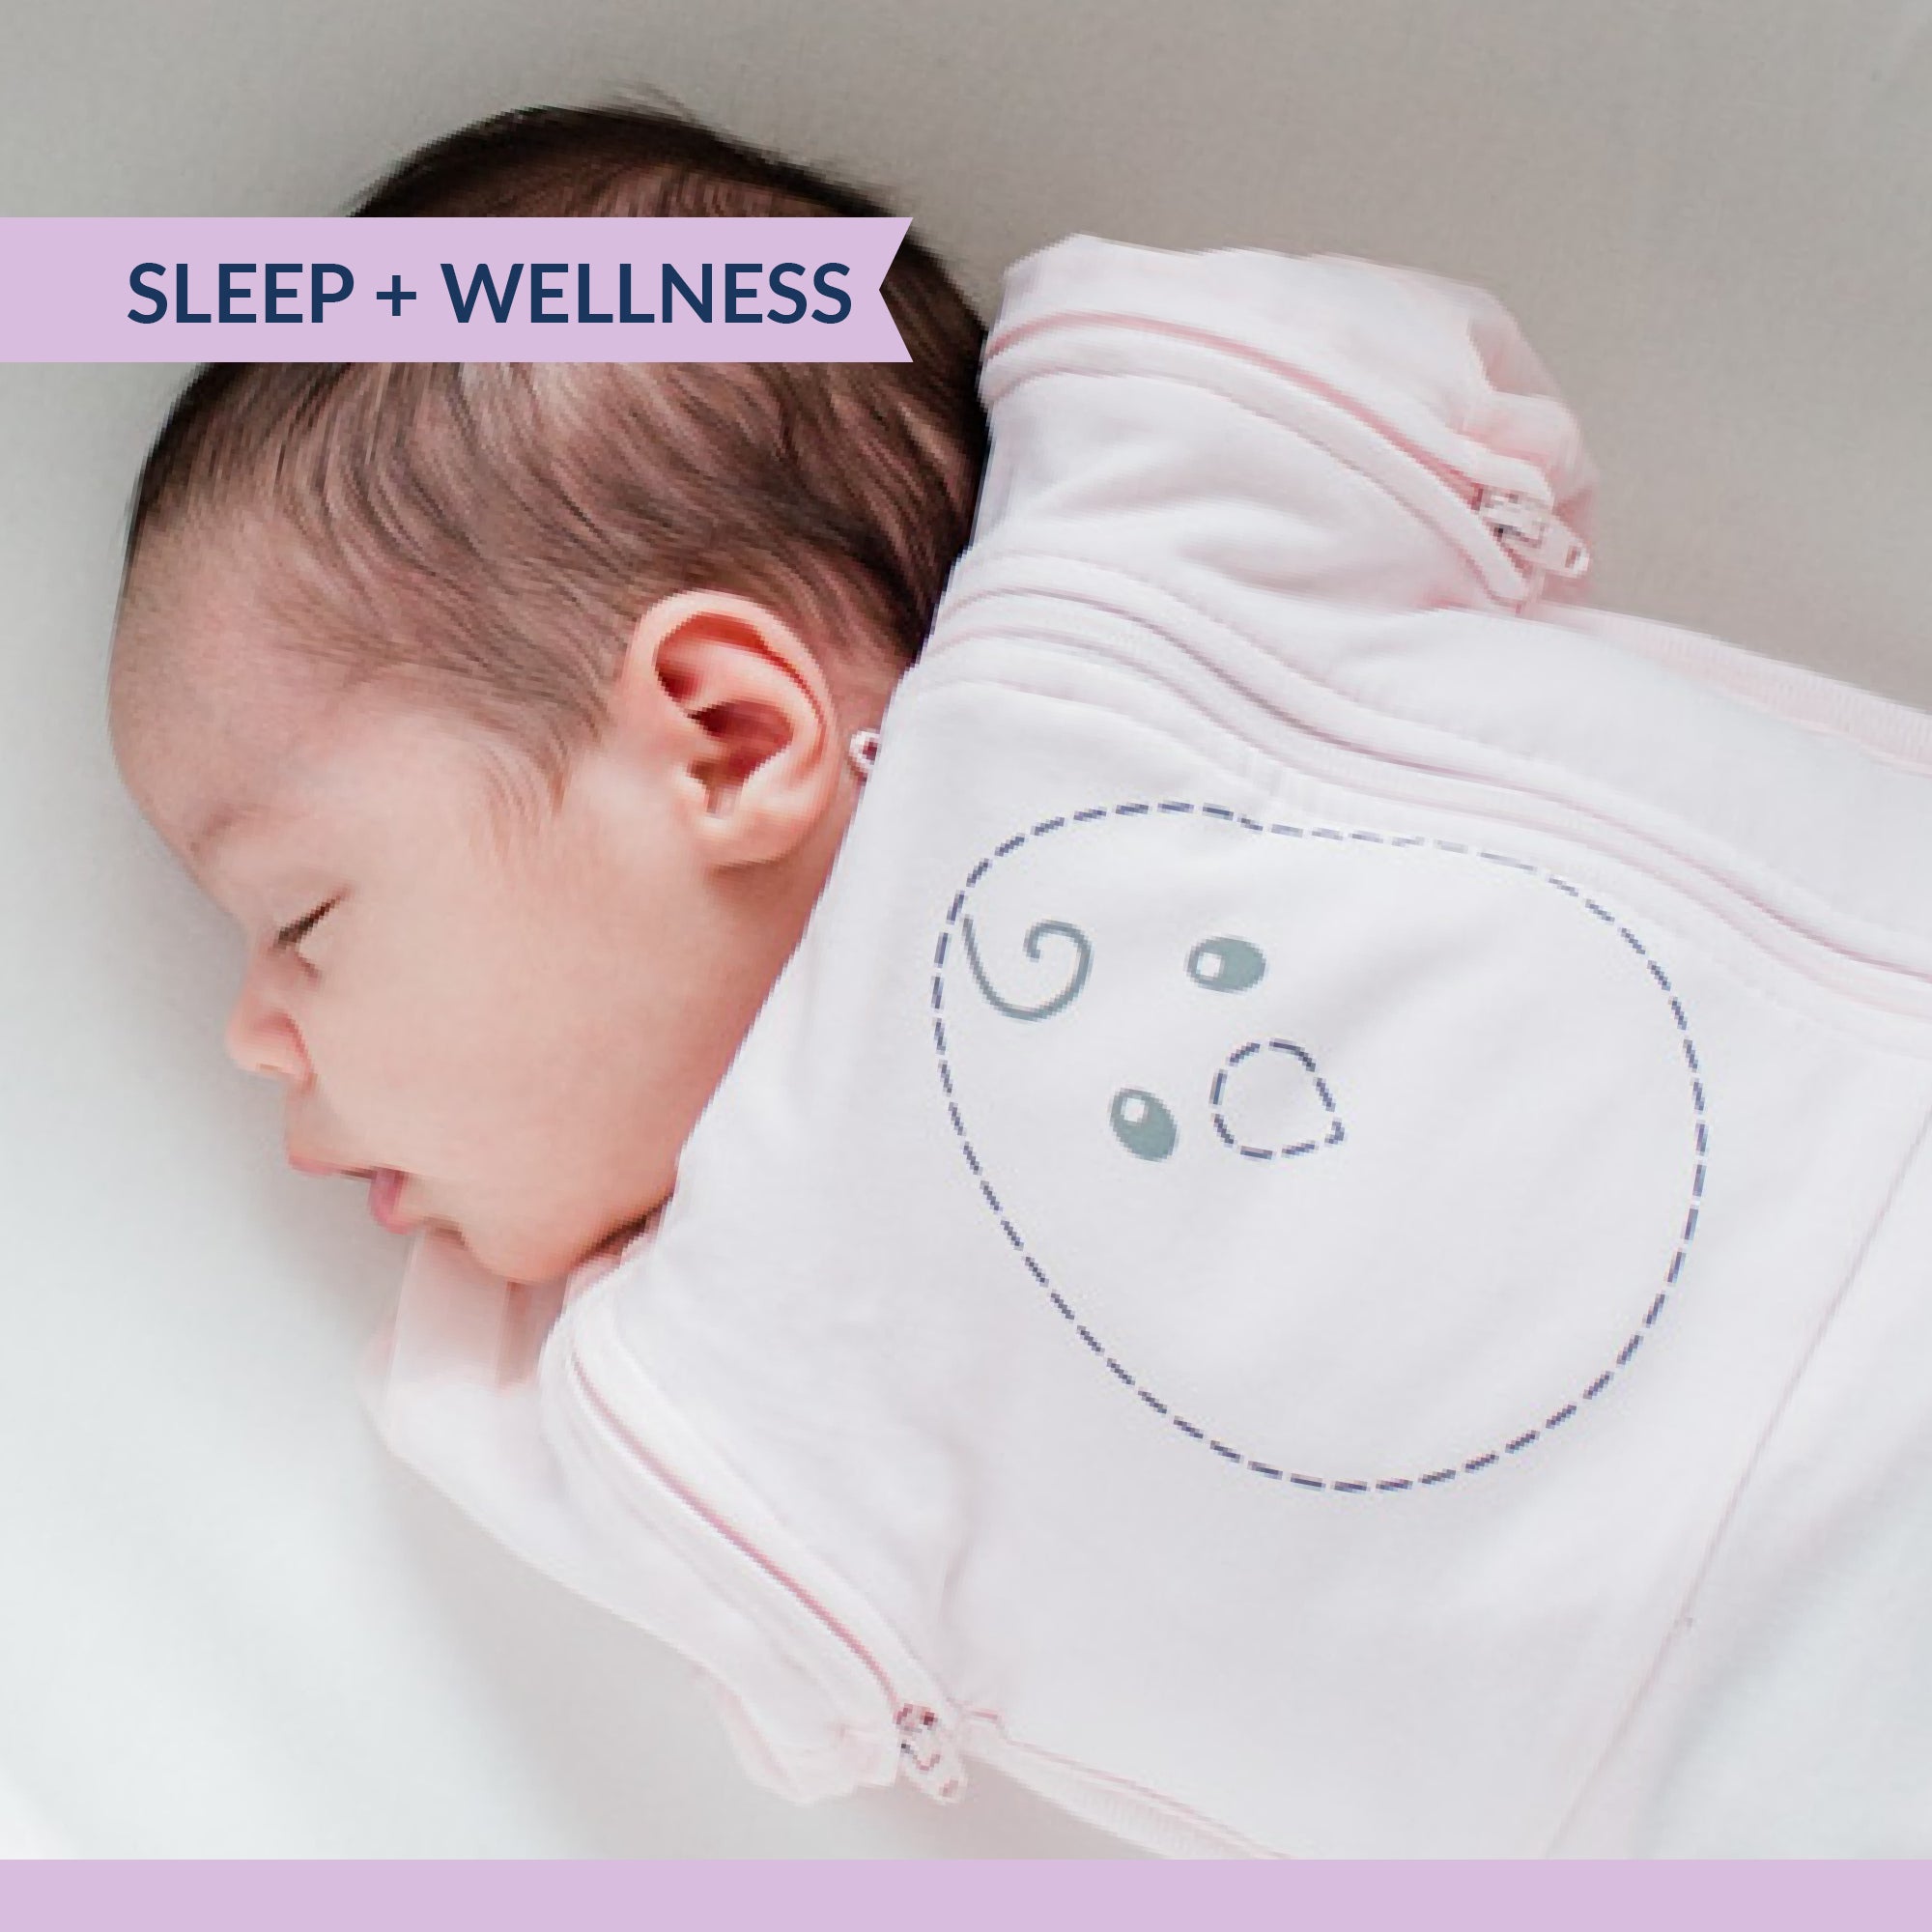 7 Newborn reflexes and how they help protect your baby